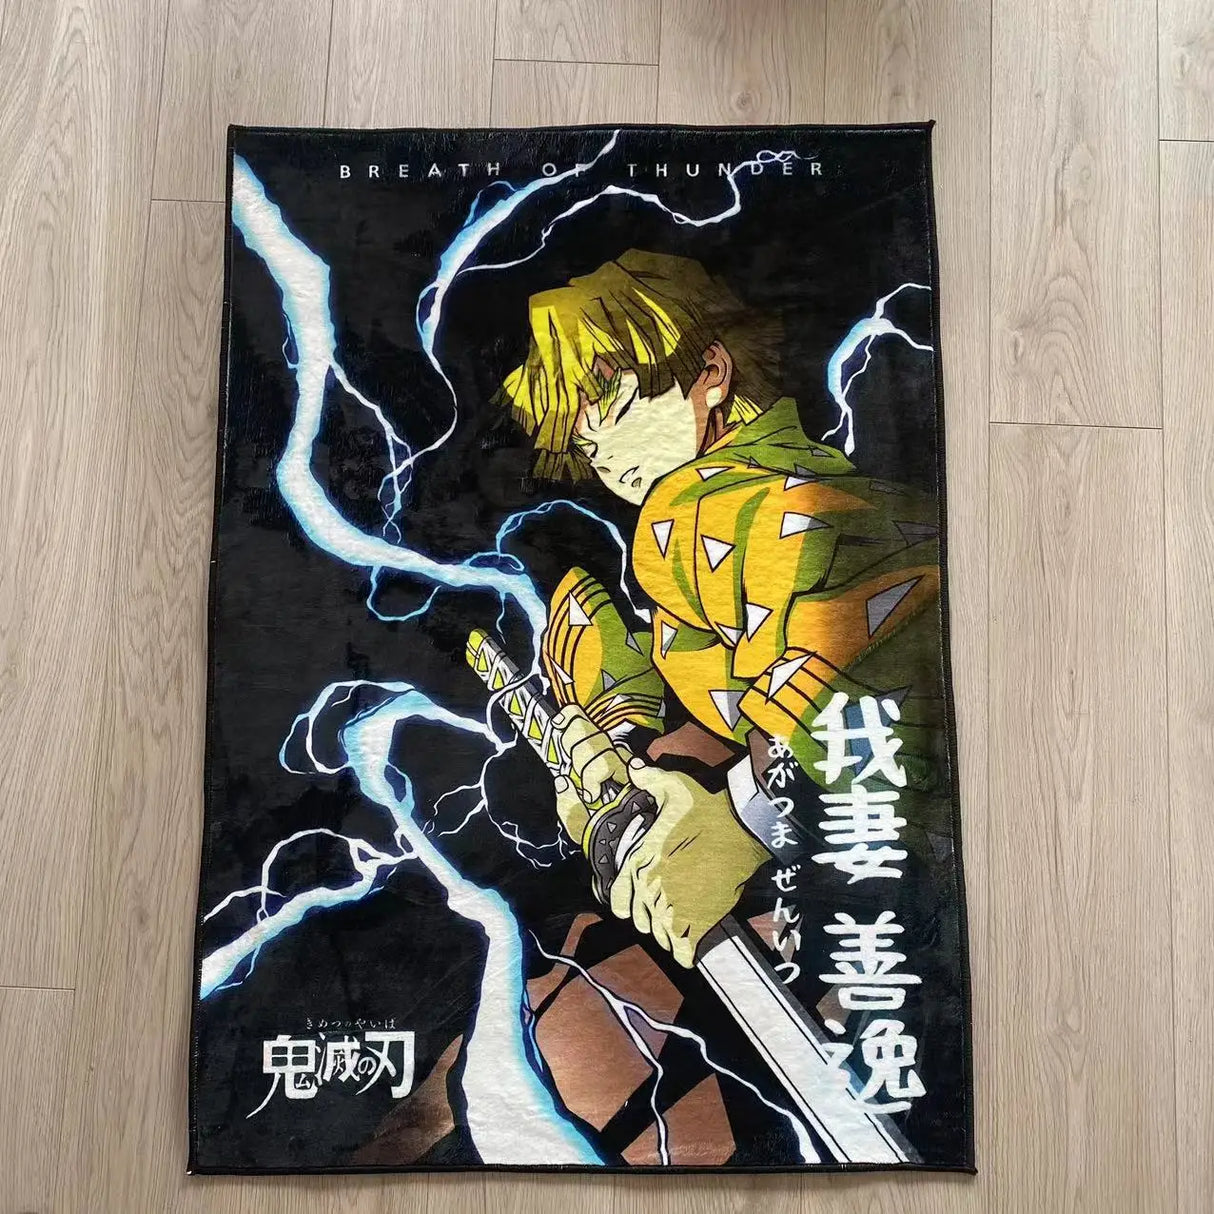 Elevate your home entrance with Zenitsu Doormat, tribute to the unbeatable hero. If you are looking for more Demon Slayer Merch, We have it all!| Check out all our Anime Merch now!